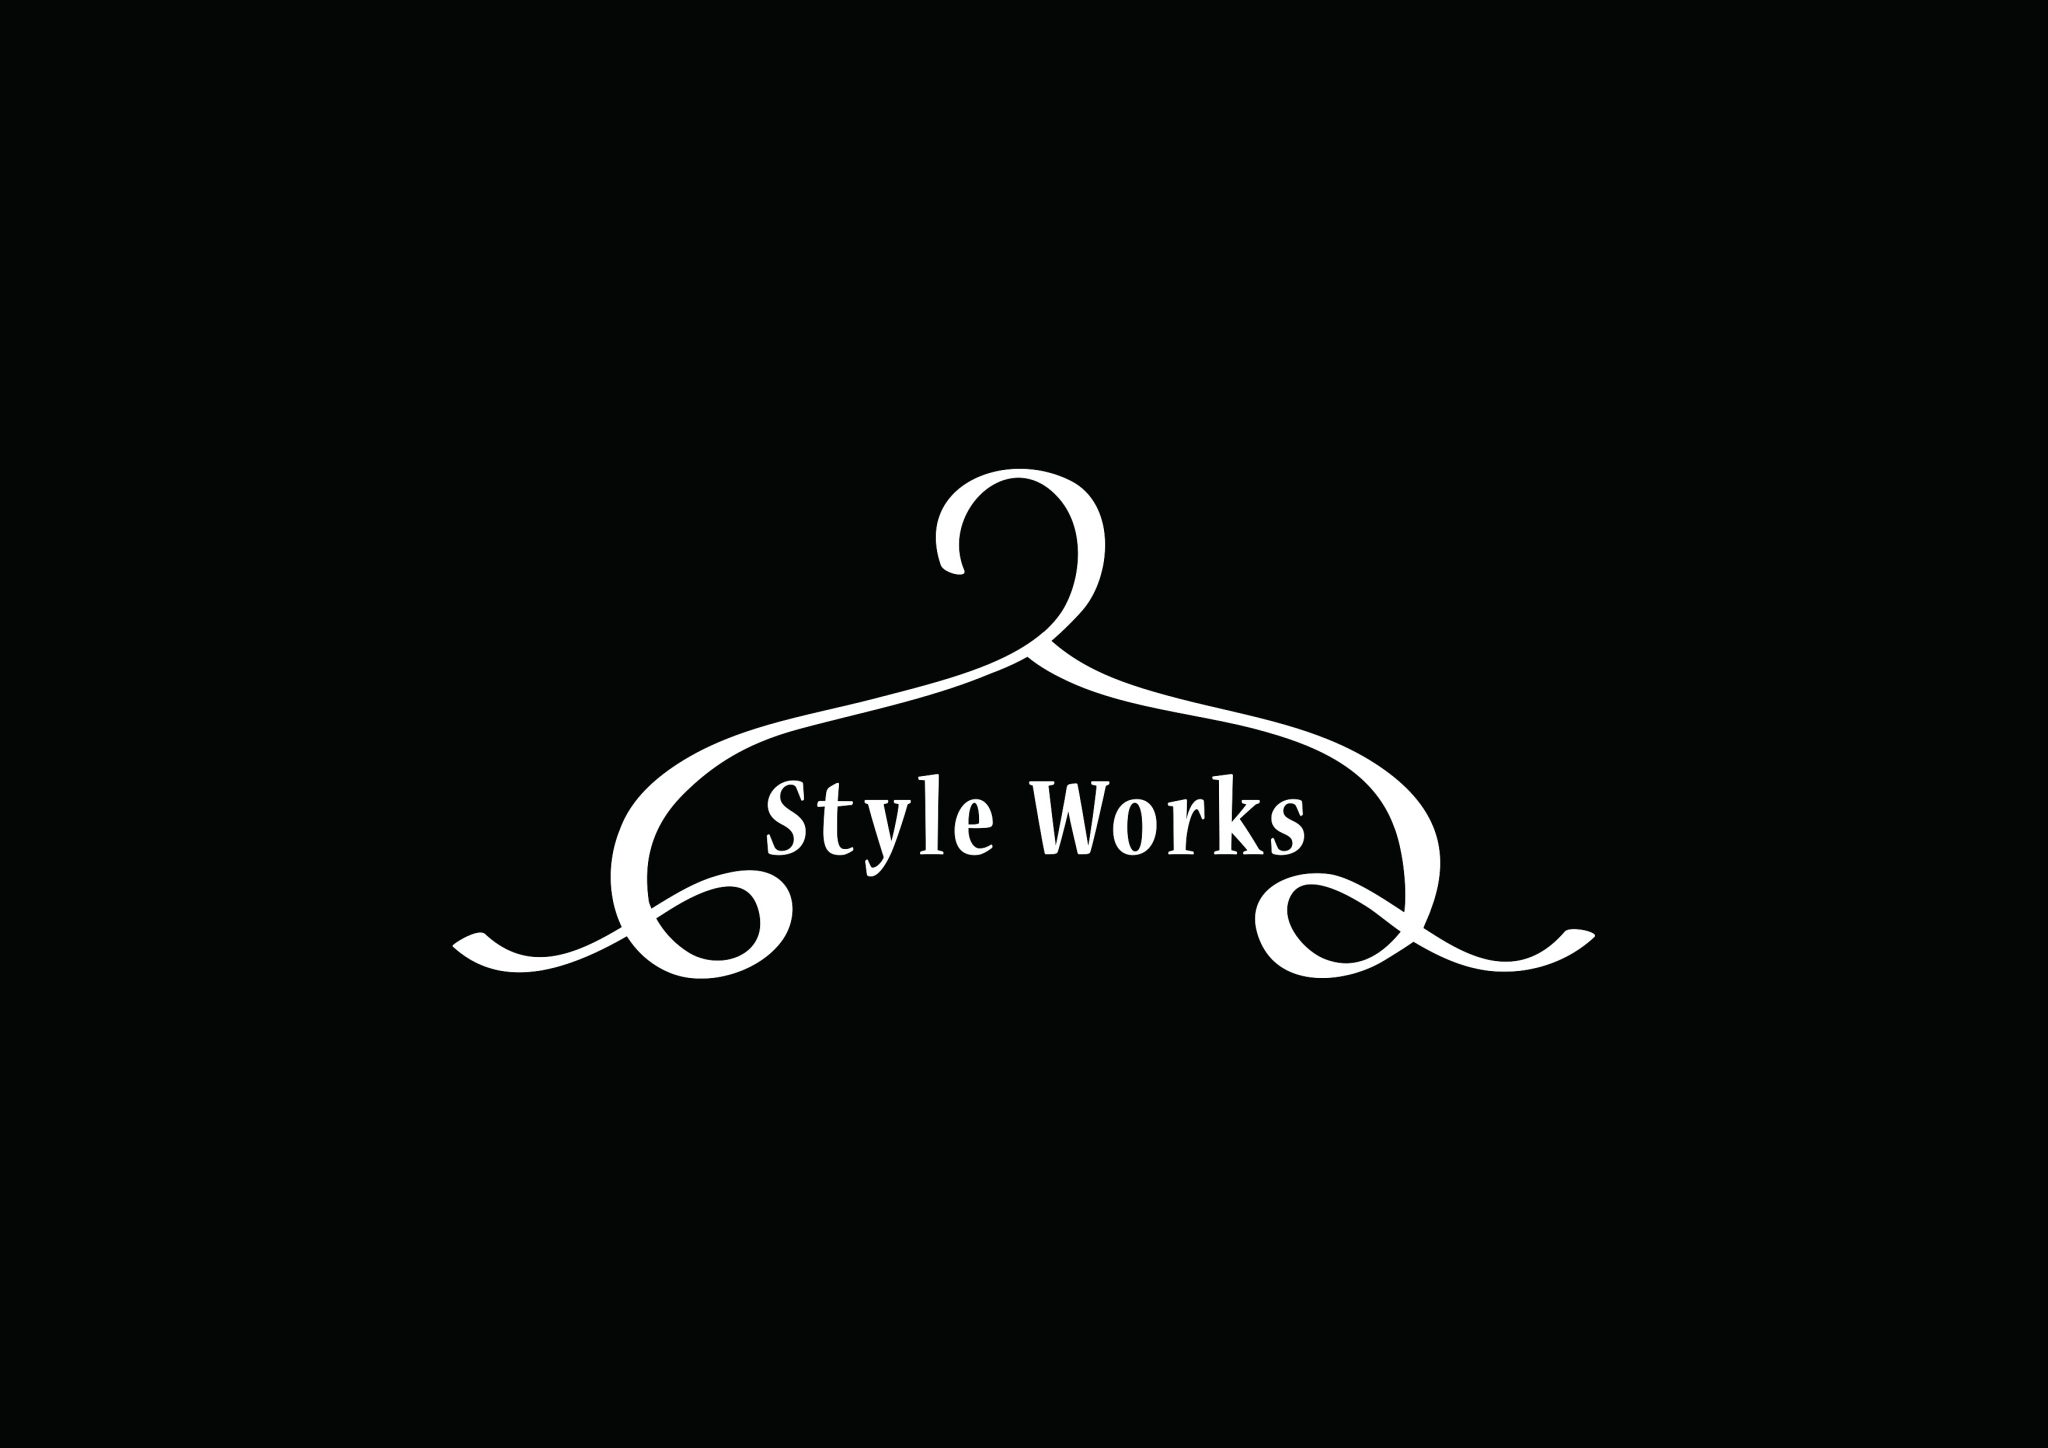 Style Works